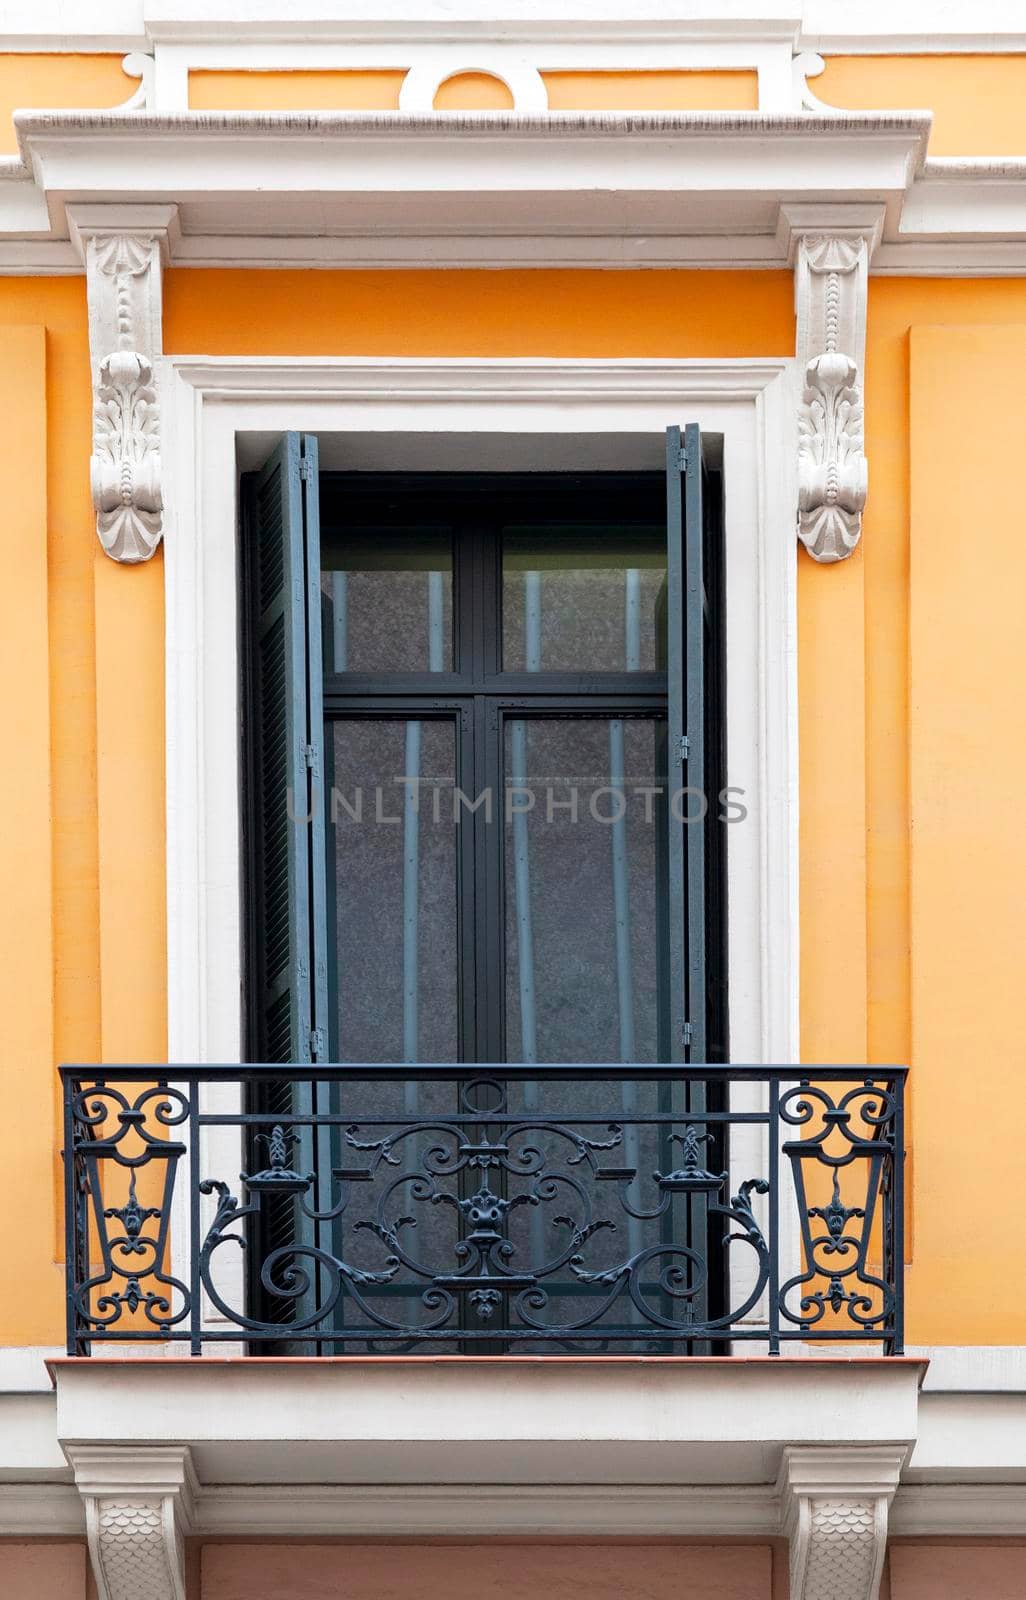 Ornate window of an old building, architecture detail